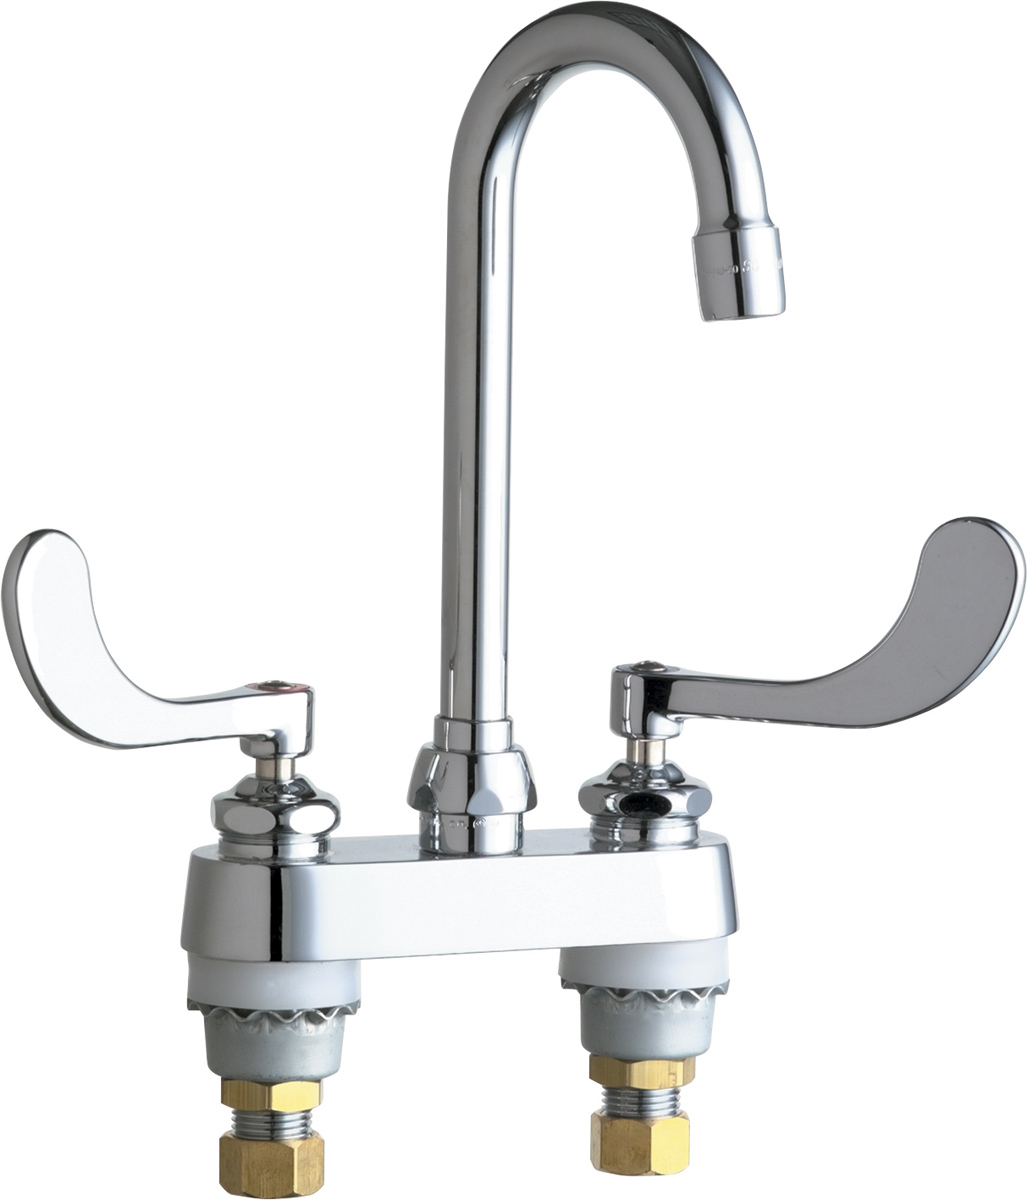 CHICAGO FAUCETS HOT AND COLD SINK FAUCET, 0.5 GPM, CHROME, LEAD FREE